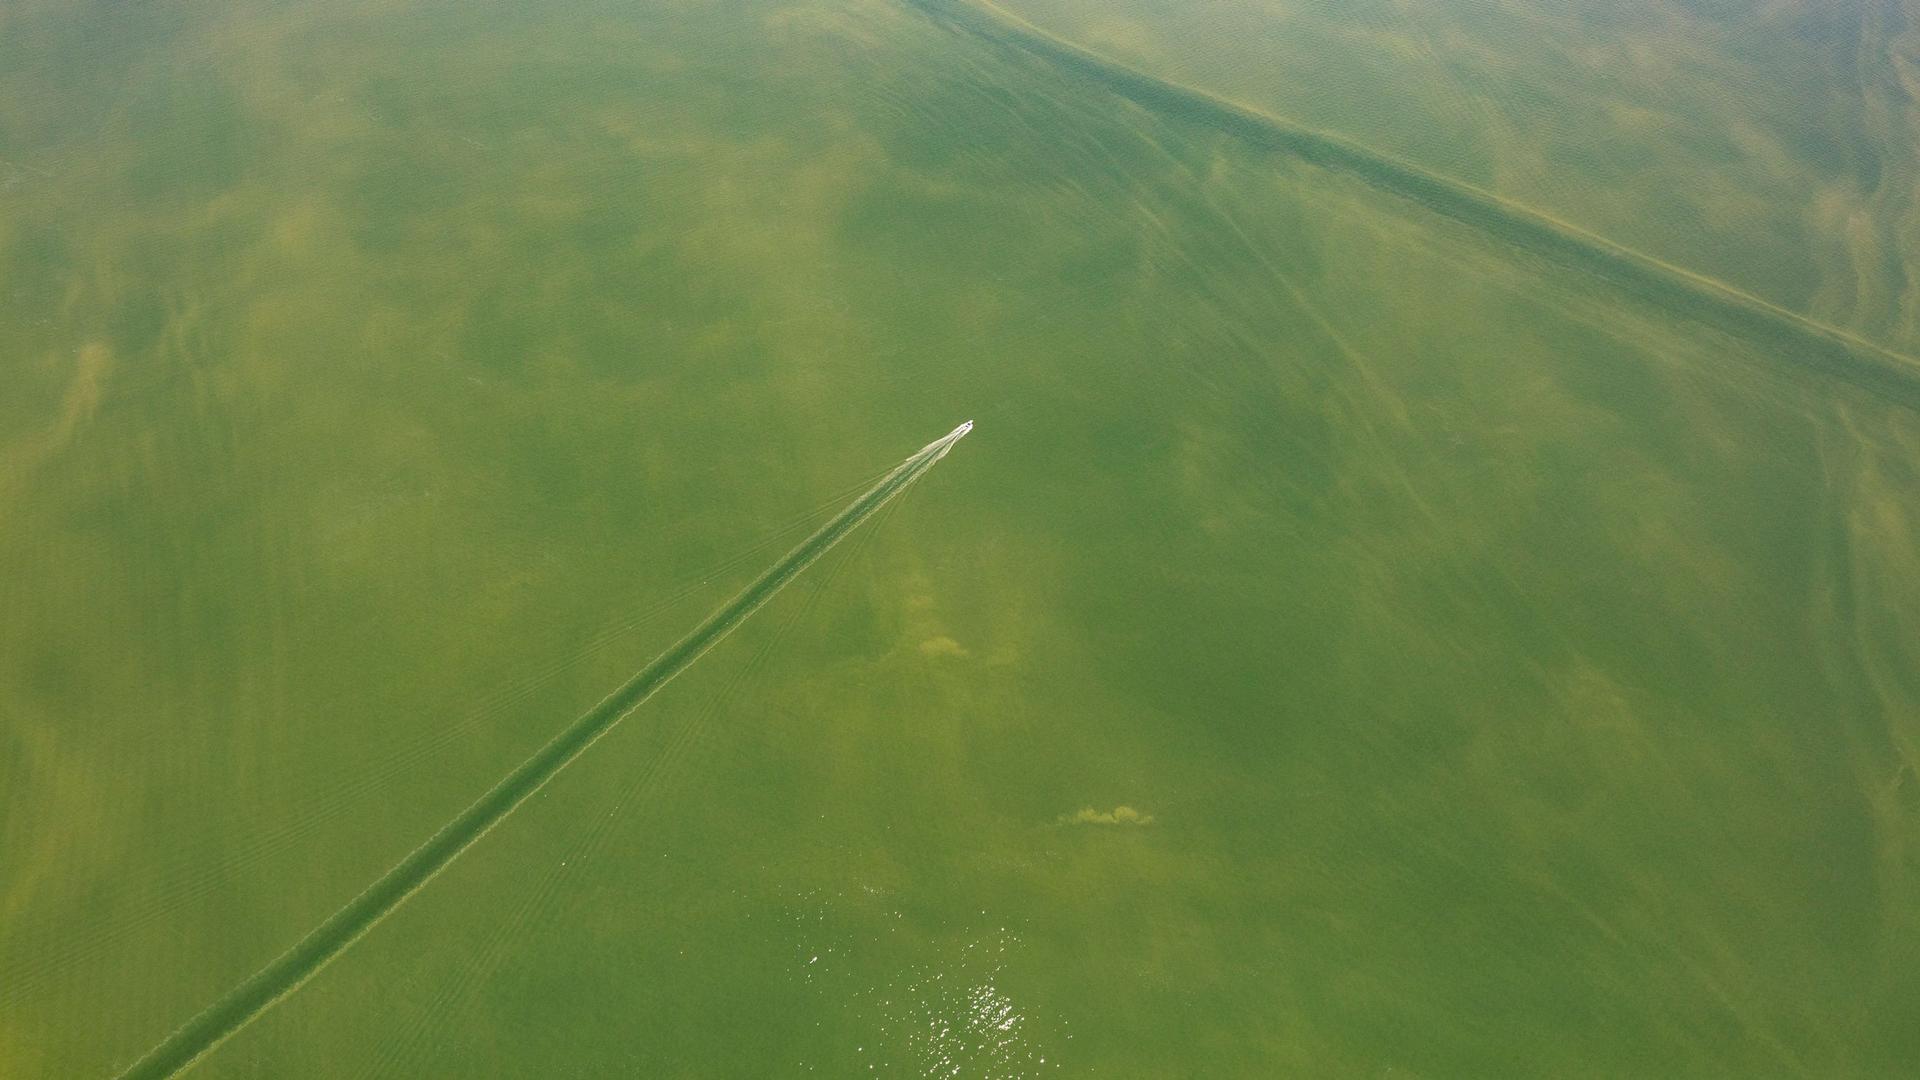 An ariel photograph showing Lake Erie coved in green algae with a boat moving through the middle.